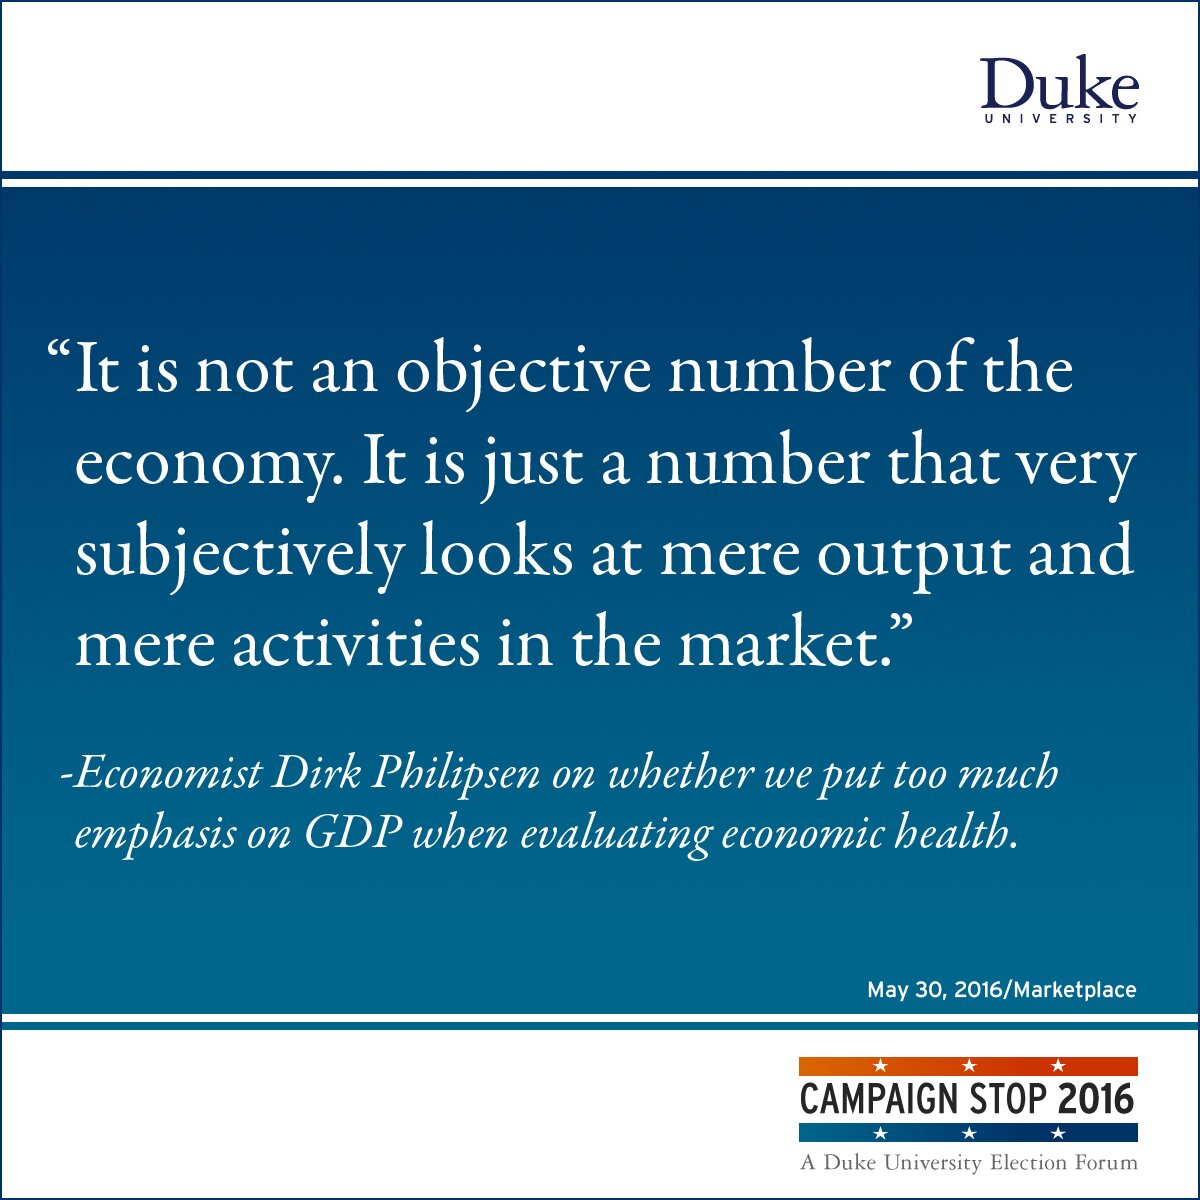 “It is not an objective number of the economy. It is just a number that very subjectively looks at mere output and mere activities in the market.” -Economist Dirk Philipsen on whether we put too much emphasis on GDP when evaluating economic health.